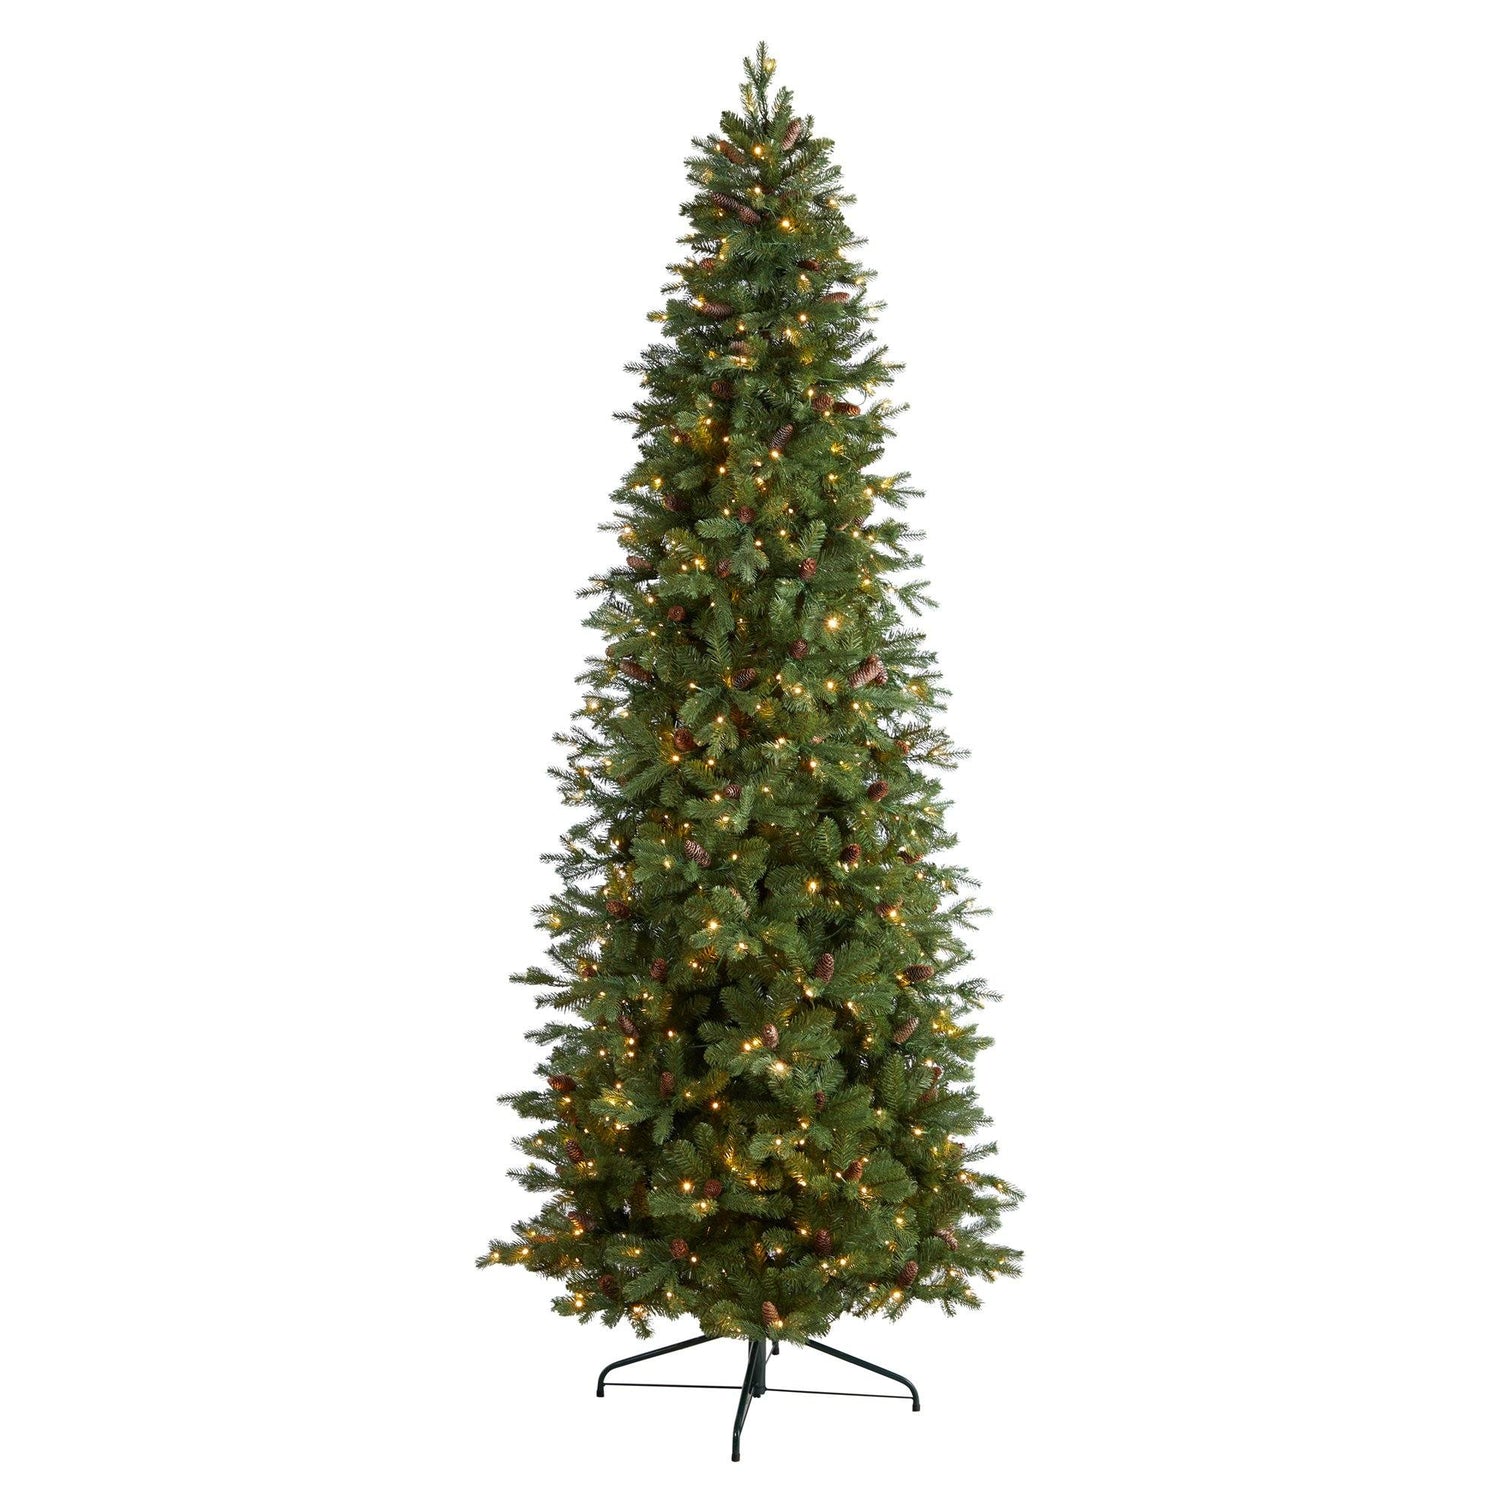 10’ Fraser Fir Artificial Christmas Tree with 780 Multicolor LED Lights and 2327 Bendable Branches